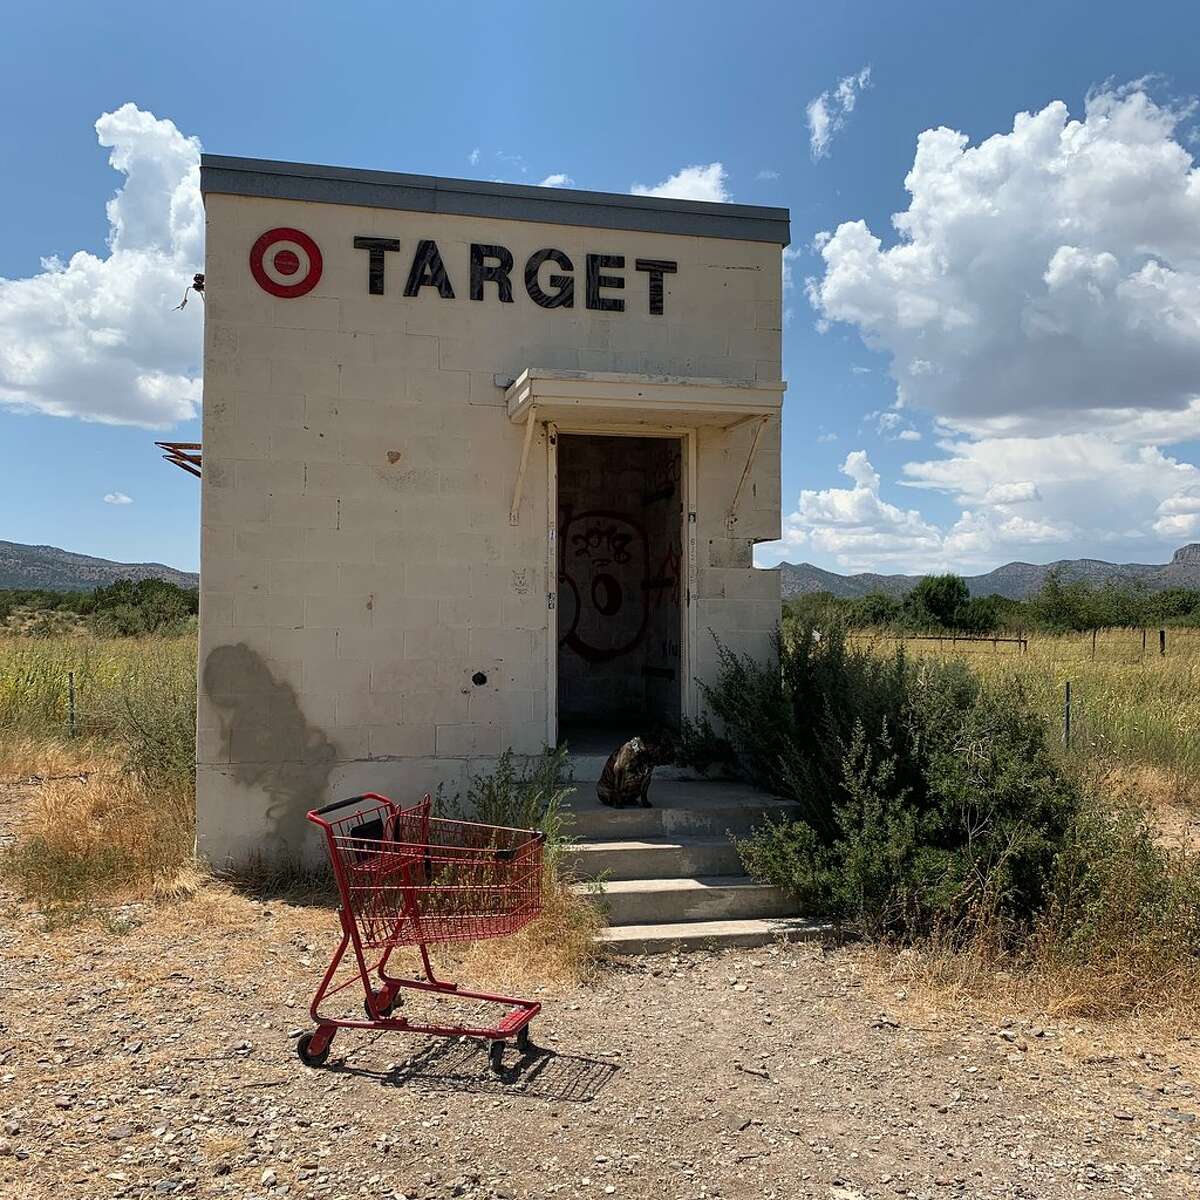 Target in Marathon Sometimes referred to as the "World's Smallest Target Store," this cinder block building was in 2016 transformed into a tiny Target that mimics the Prada installation in Valentine, Texas, near Marfa. Speaking of which...